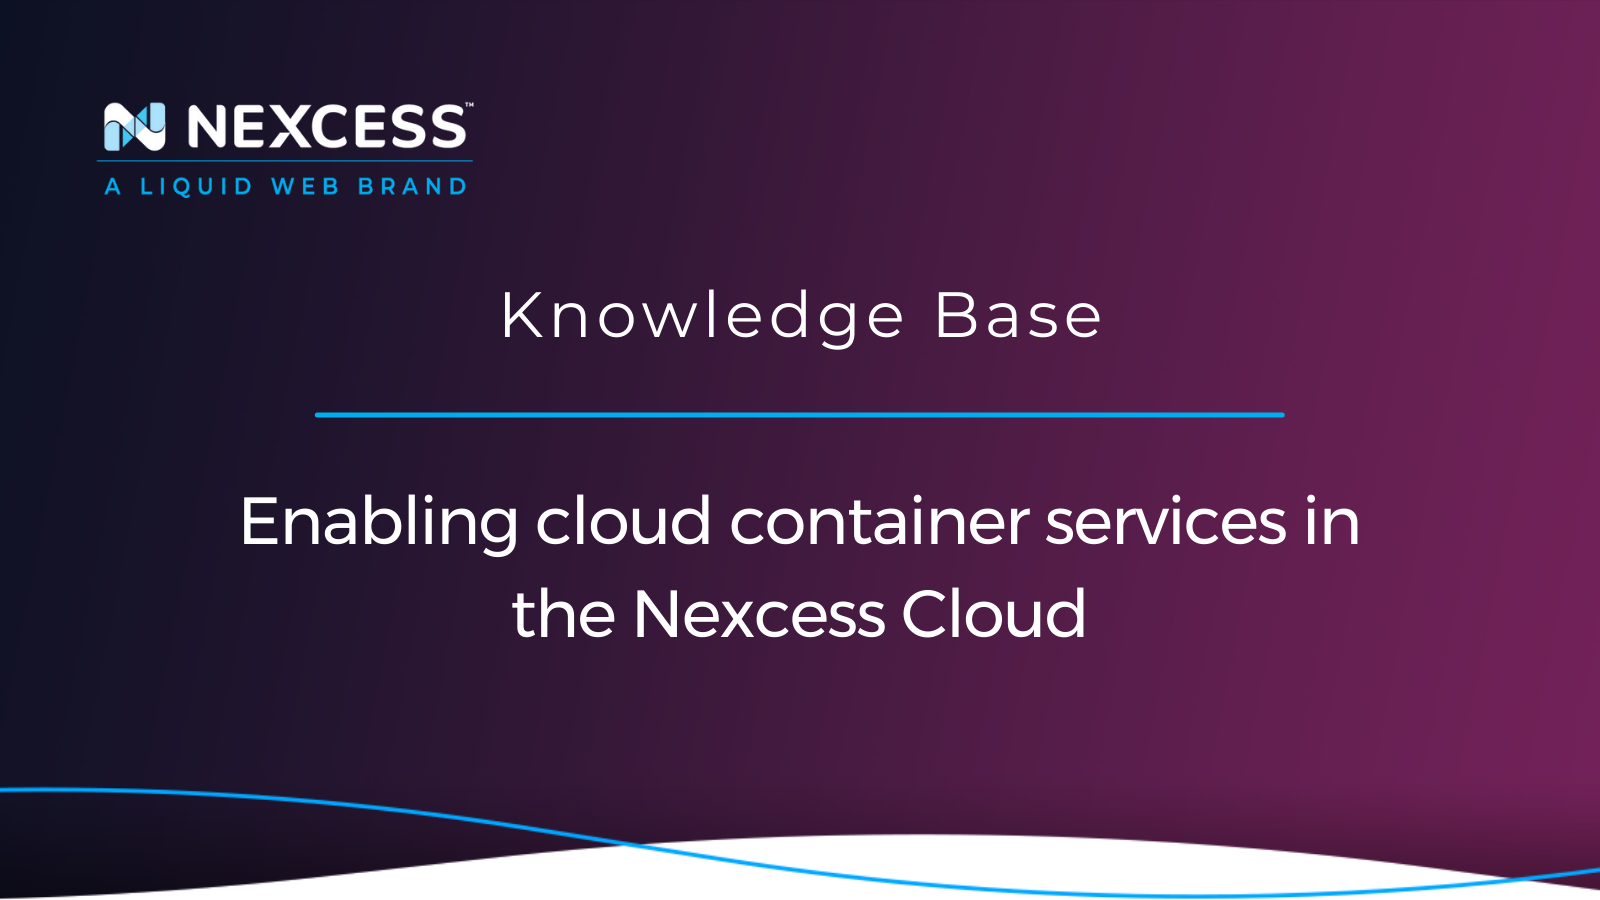 Enabling cloud container services in the Nexcess Cloud